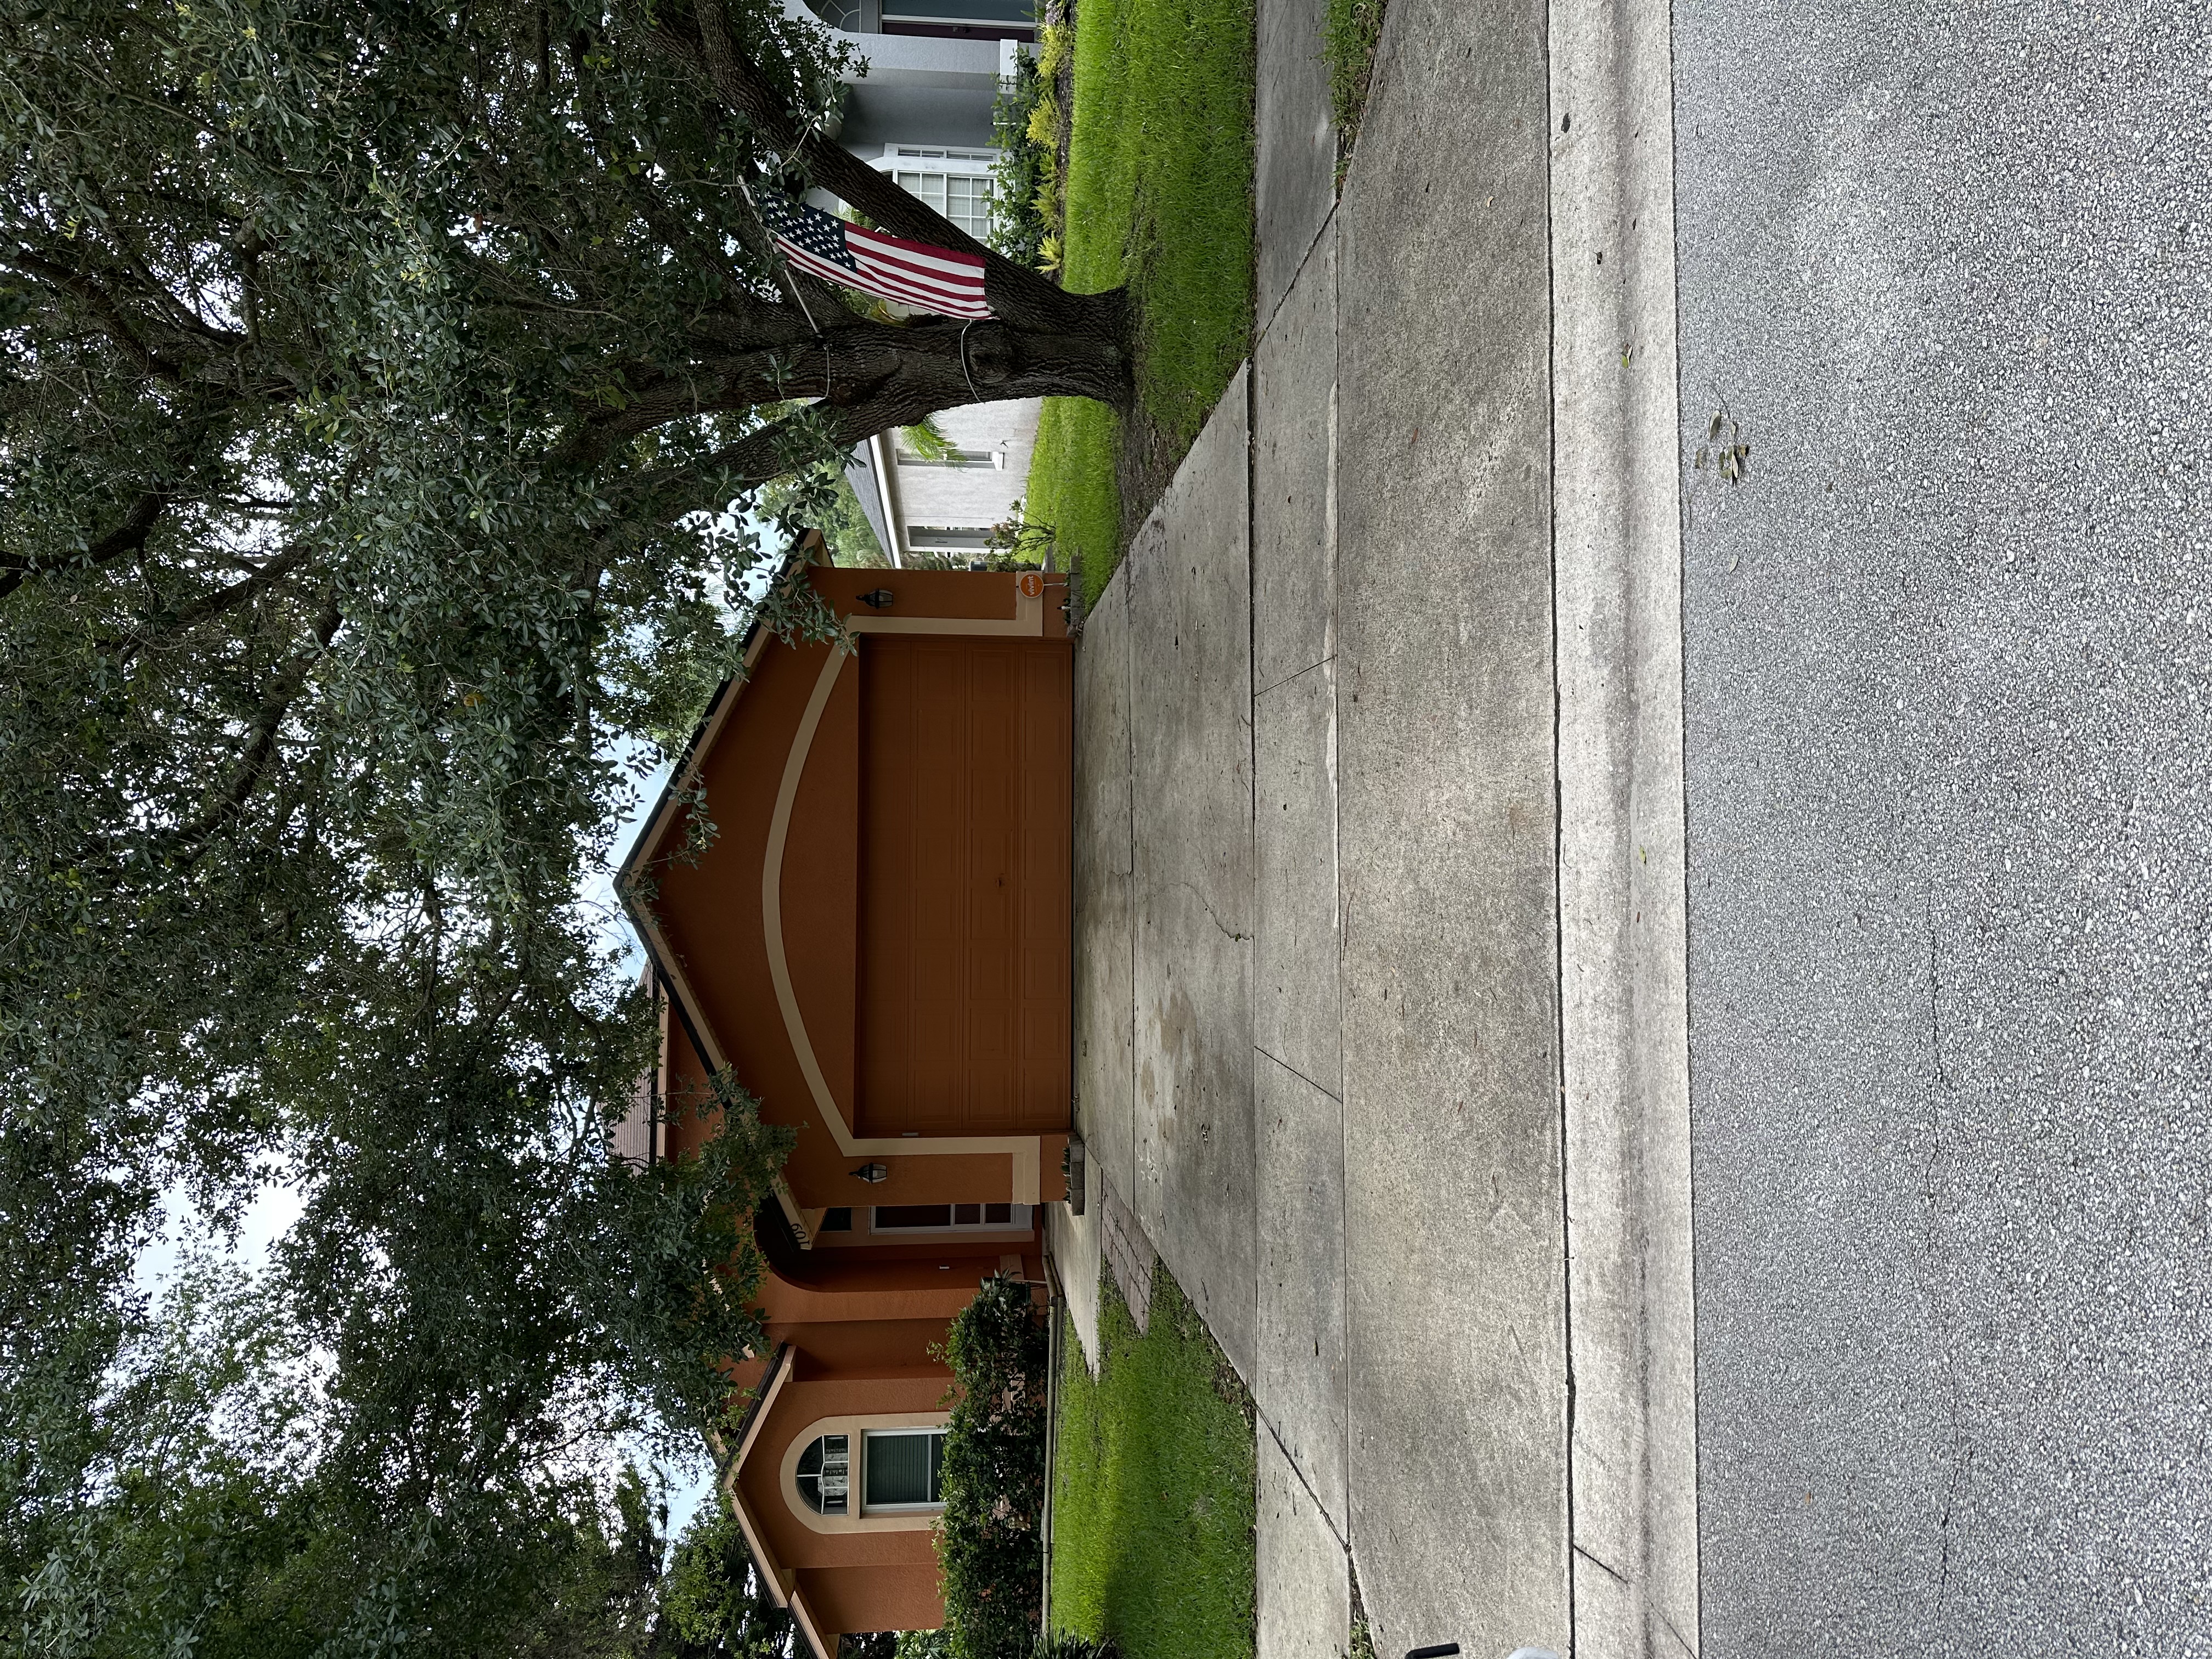 House wash and driveway cleaning in Sanford, FL